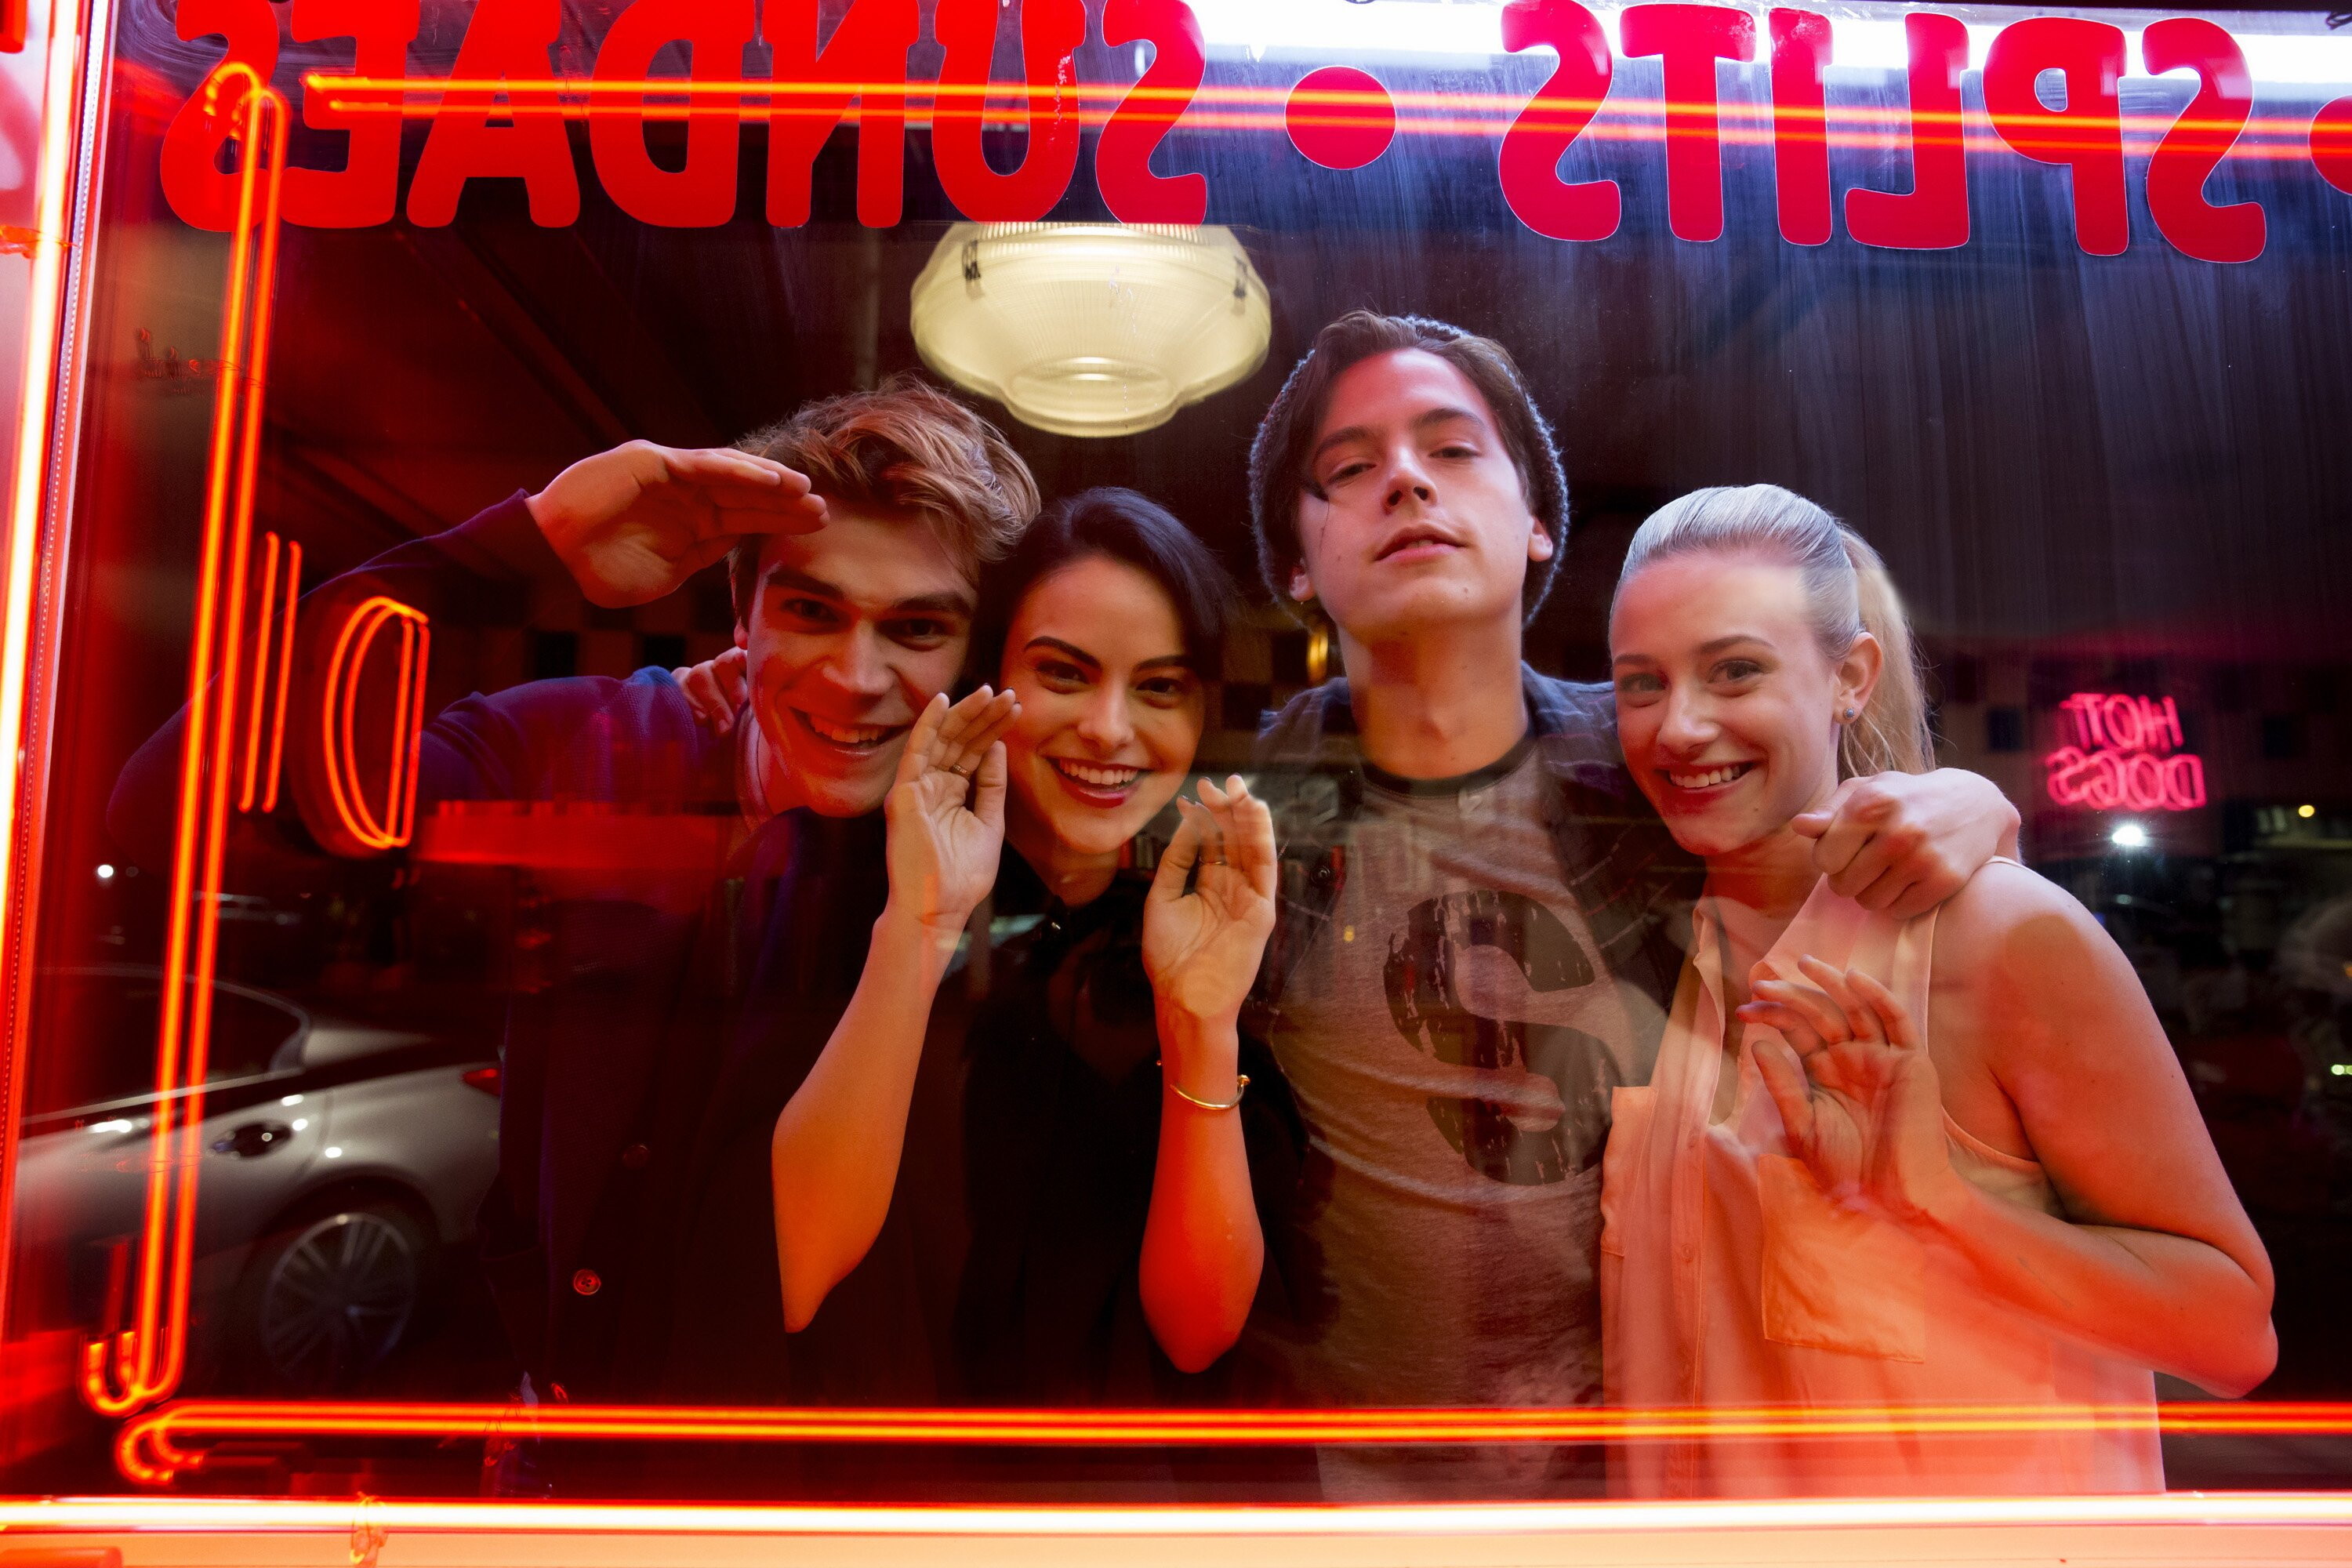 Riverdale (TV Series): The jock Archie, The girl next door Betty, The new girl Veronica, The outcast Jughead. 3000x2000 HD Background.